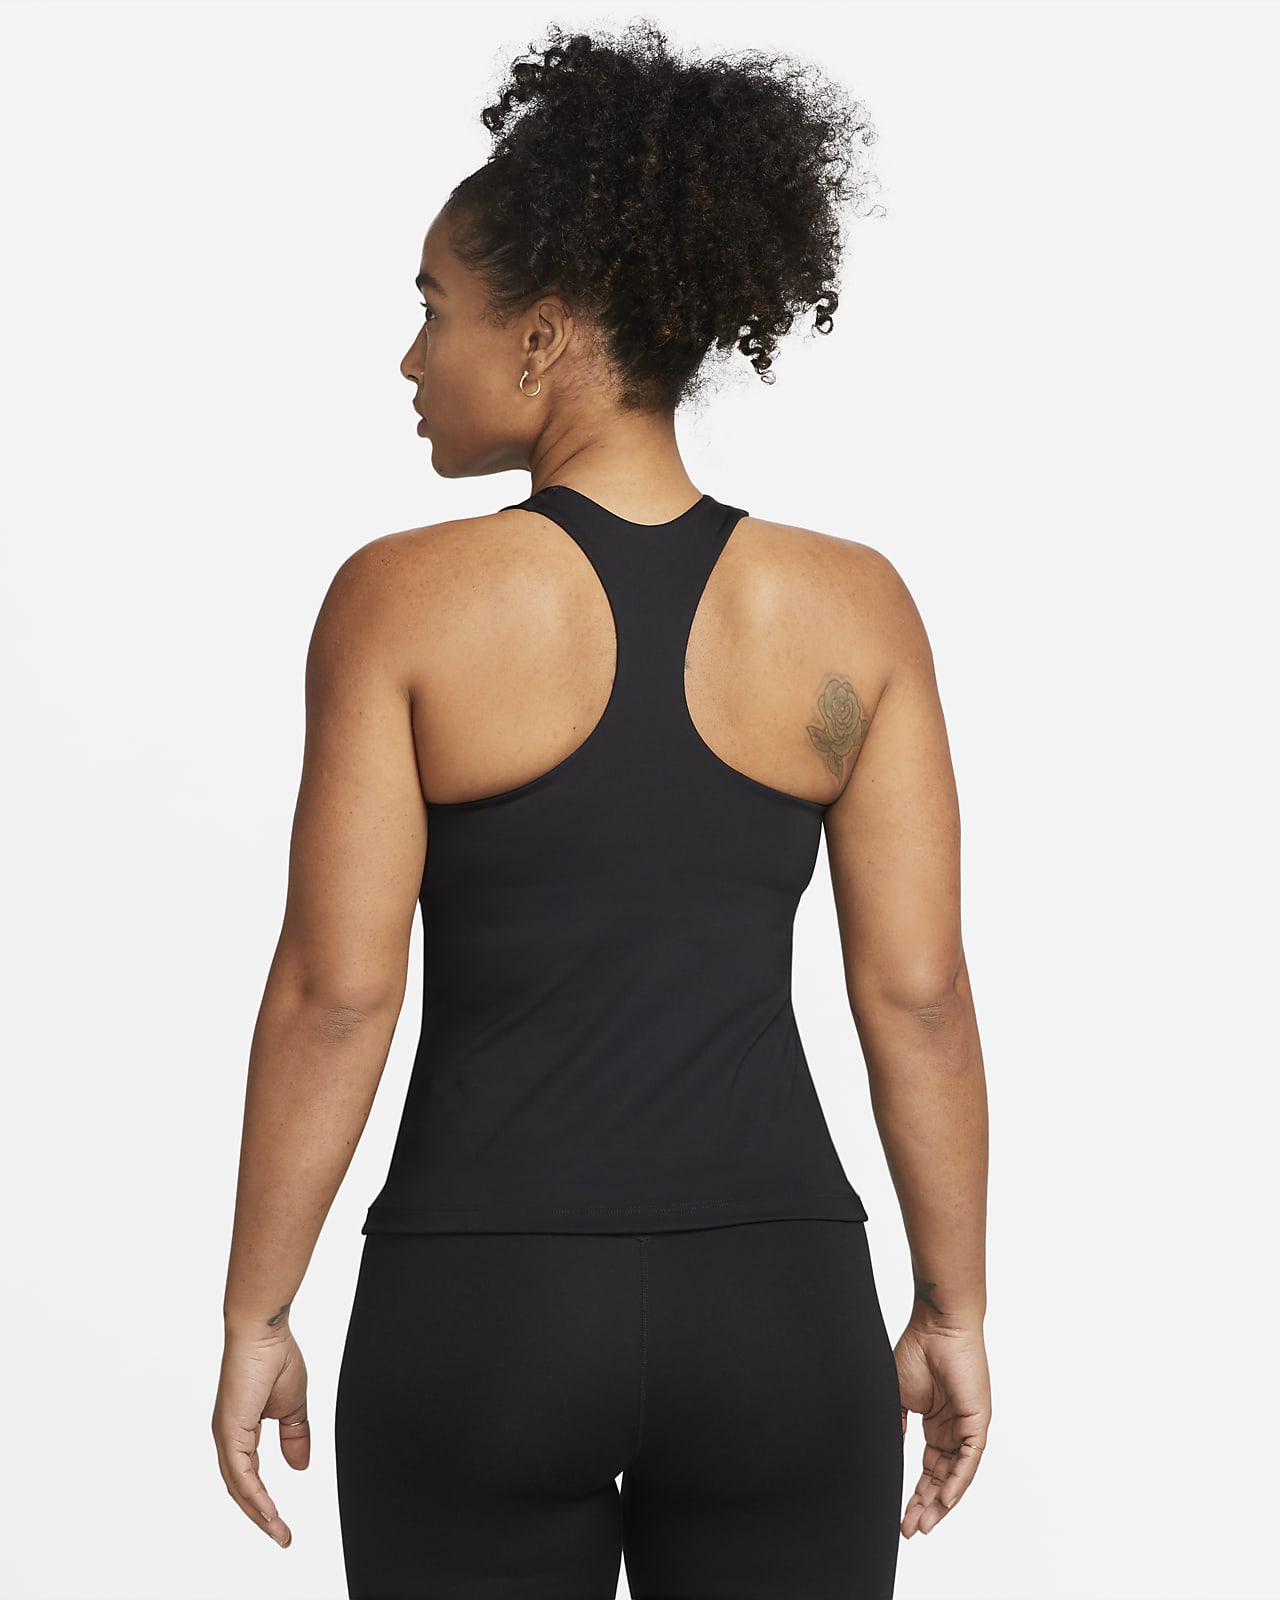 Performance At Least 20% Sustainable Material Tank Tops & Sleeveless Shirts  Sports Bras. Nike LU